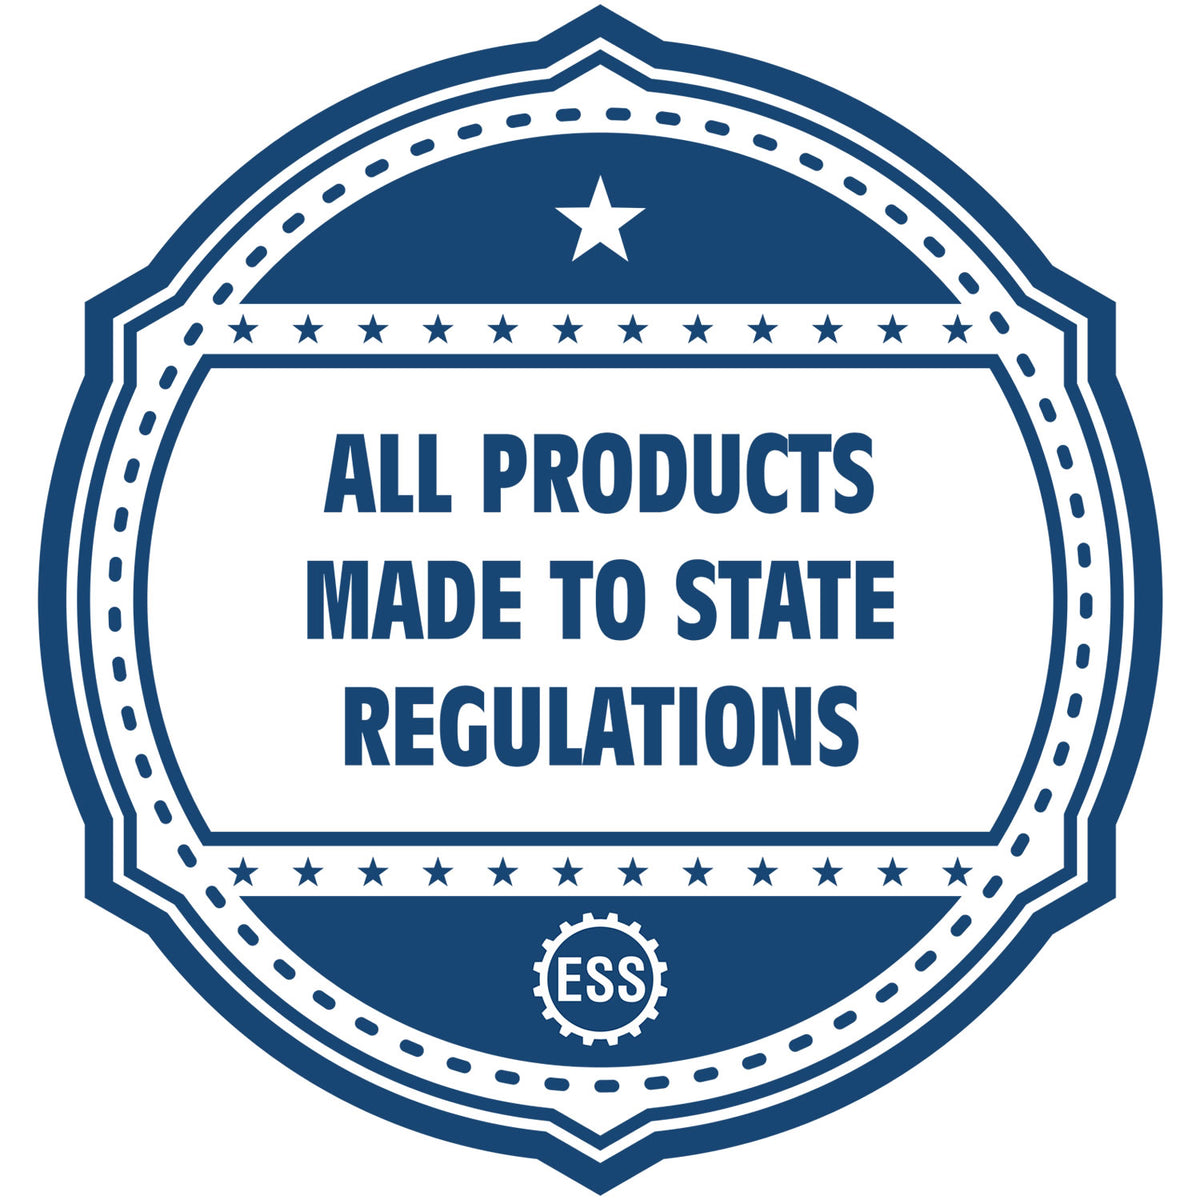 A blue icon or badge for the Hybrid New Mexico Architect Seal showing that this product is made in compliance with state regulations.